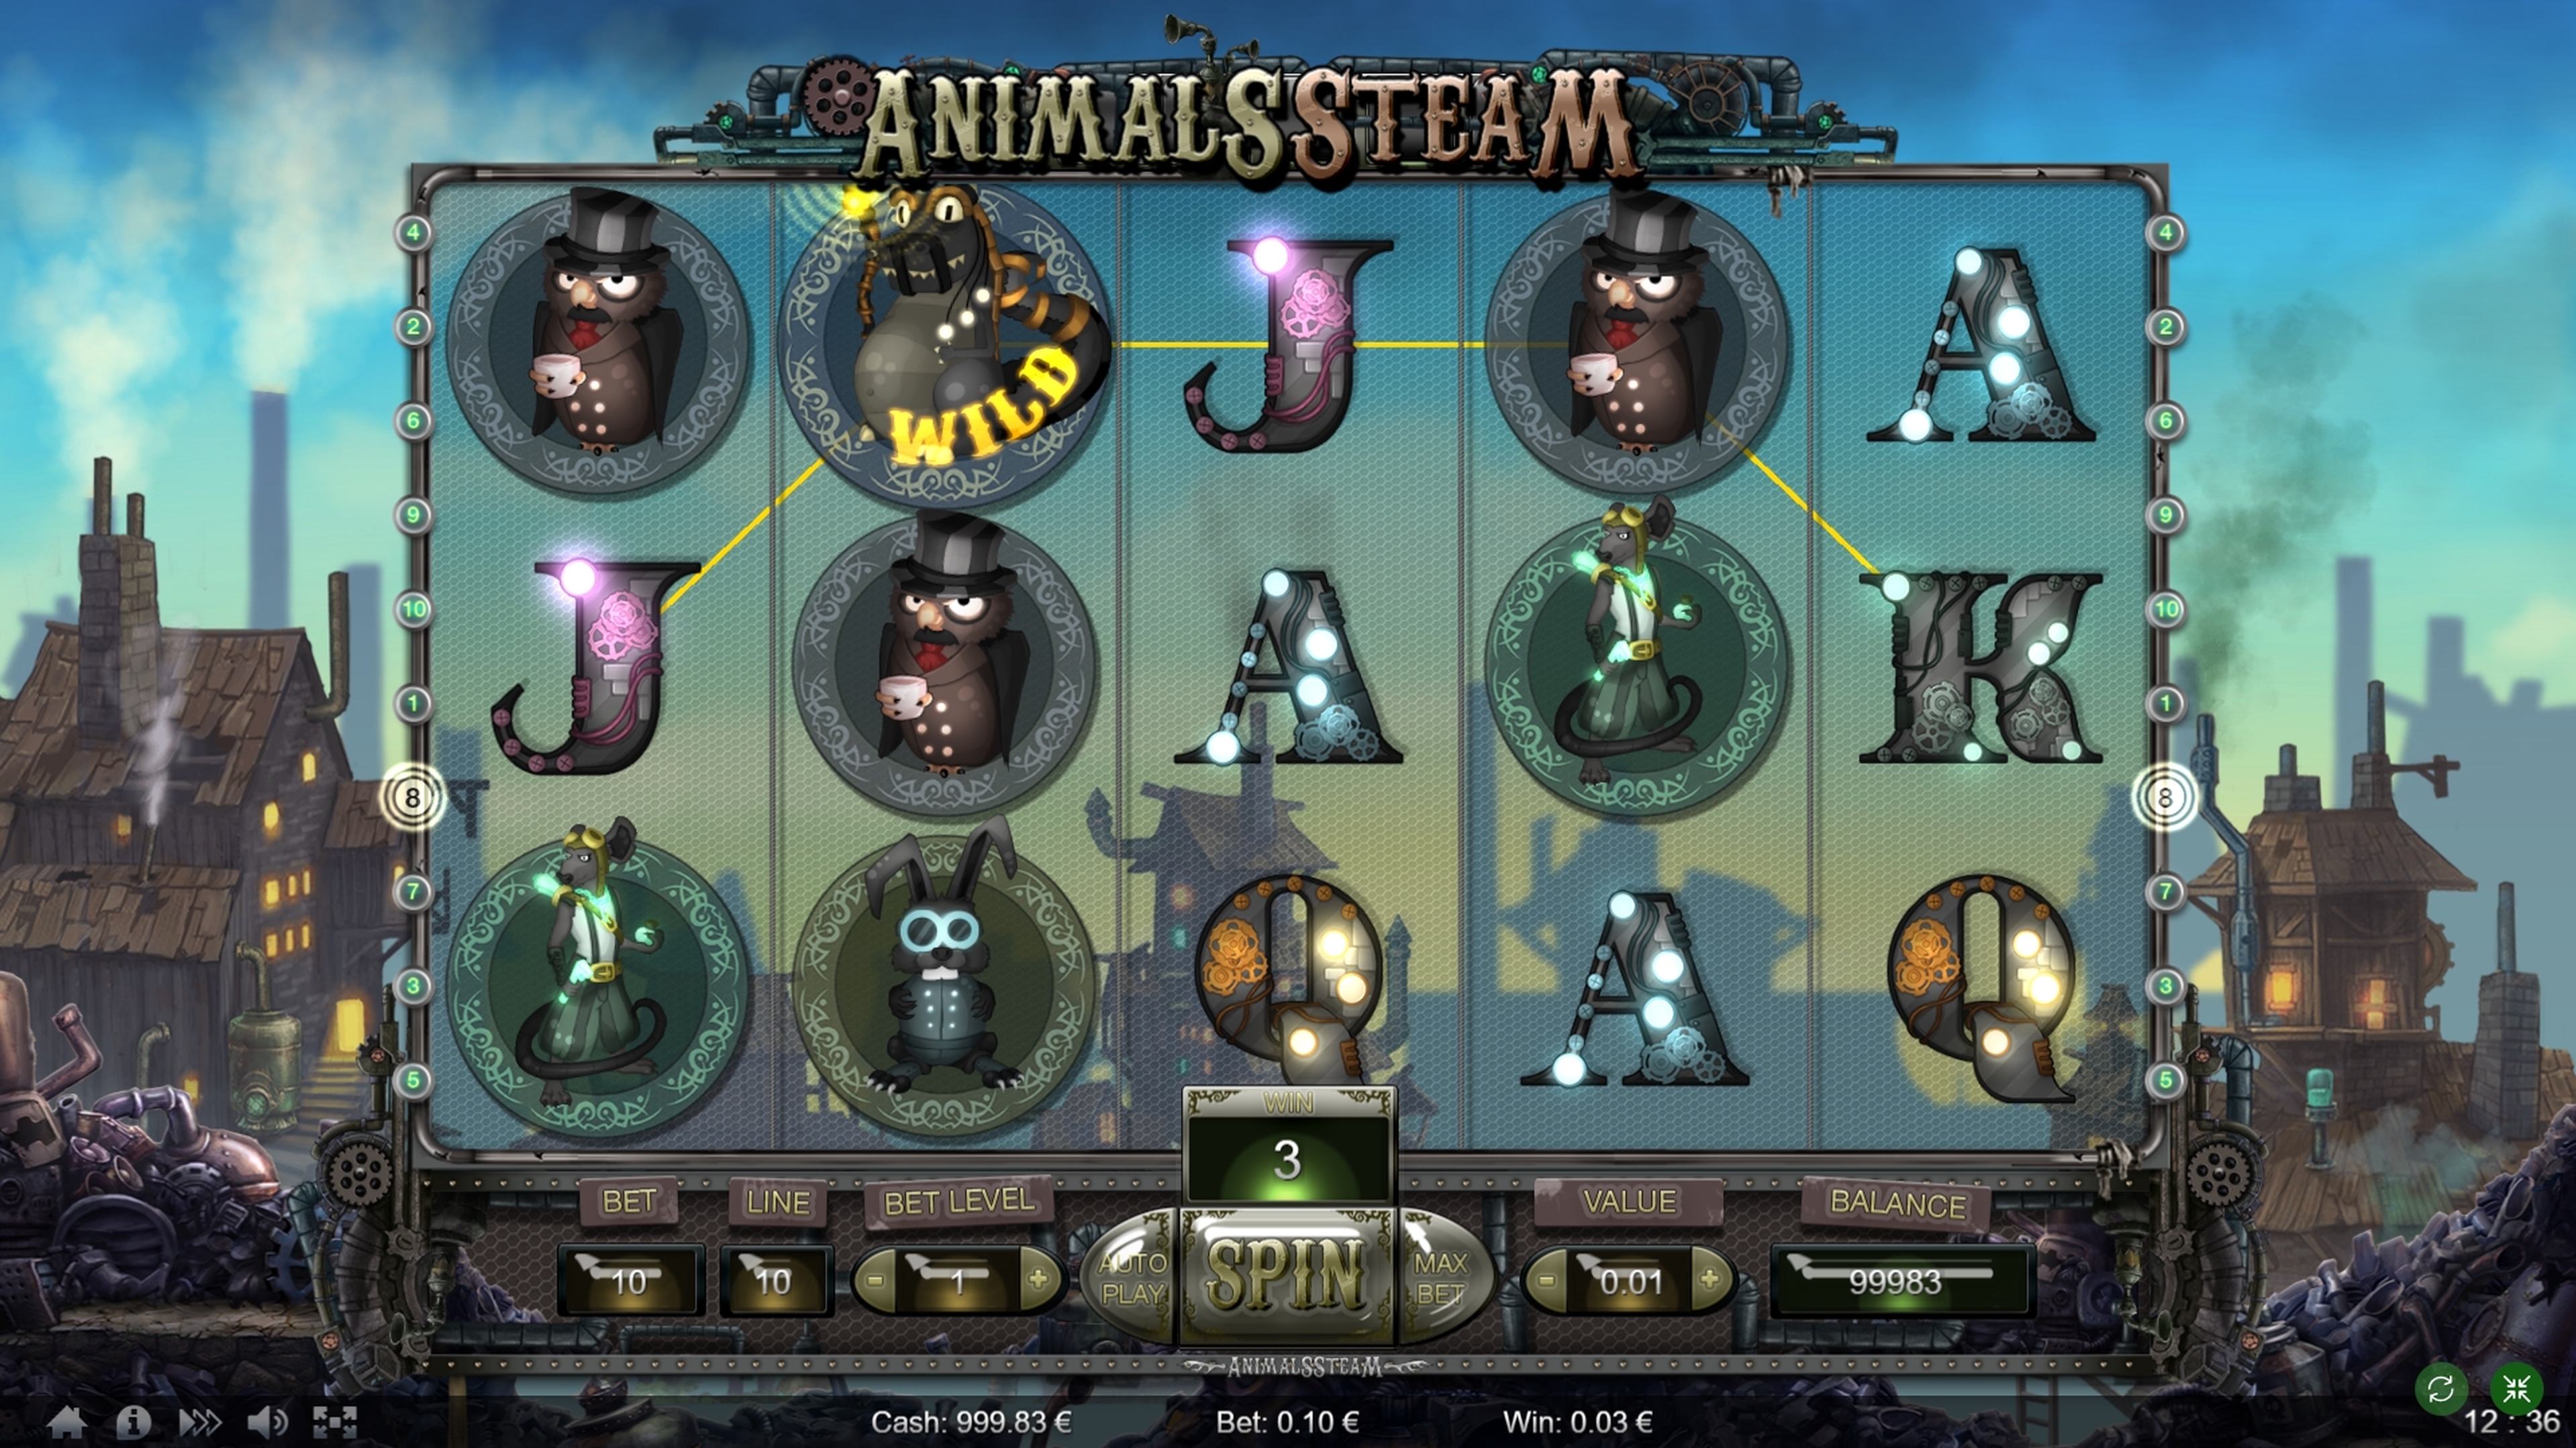 Win Money in Animals Steam Free Slot Game by Thunderspin